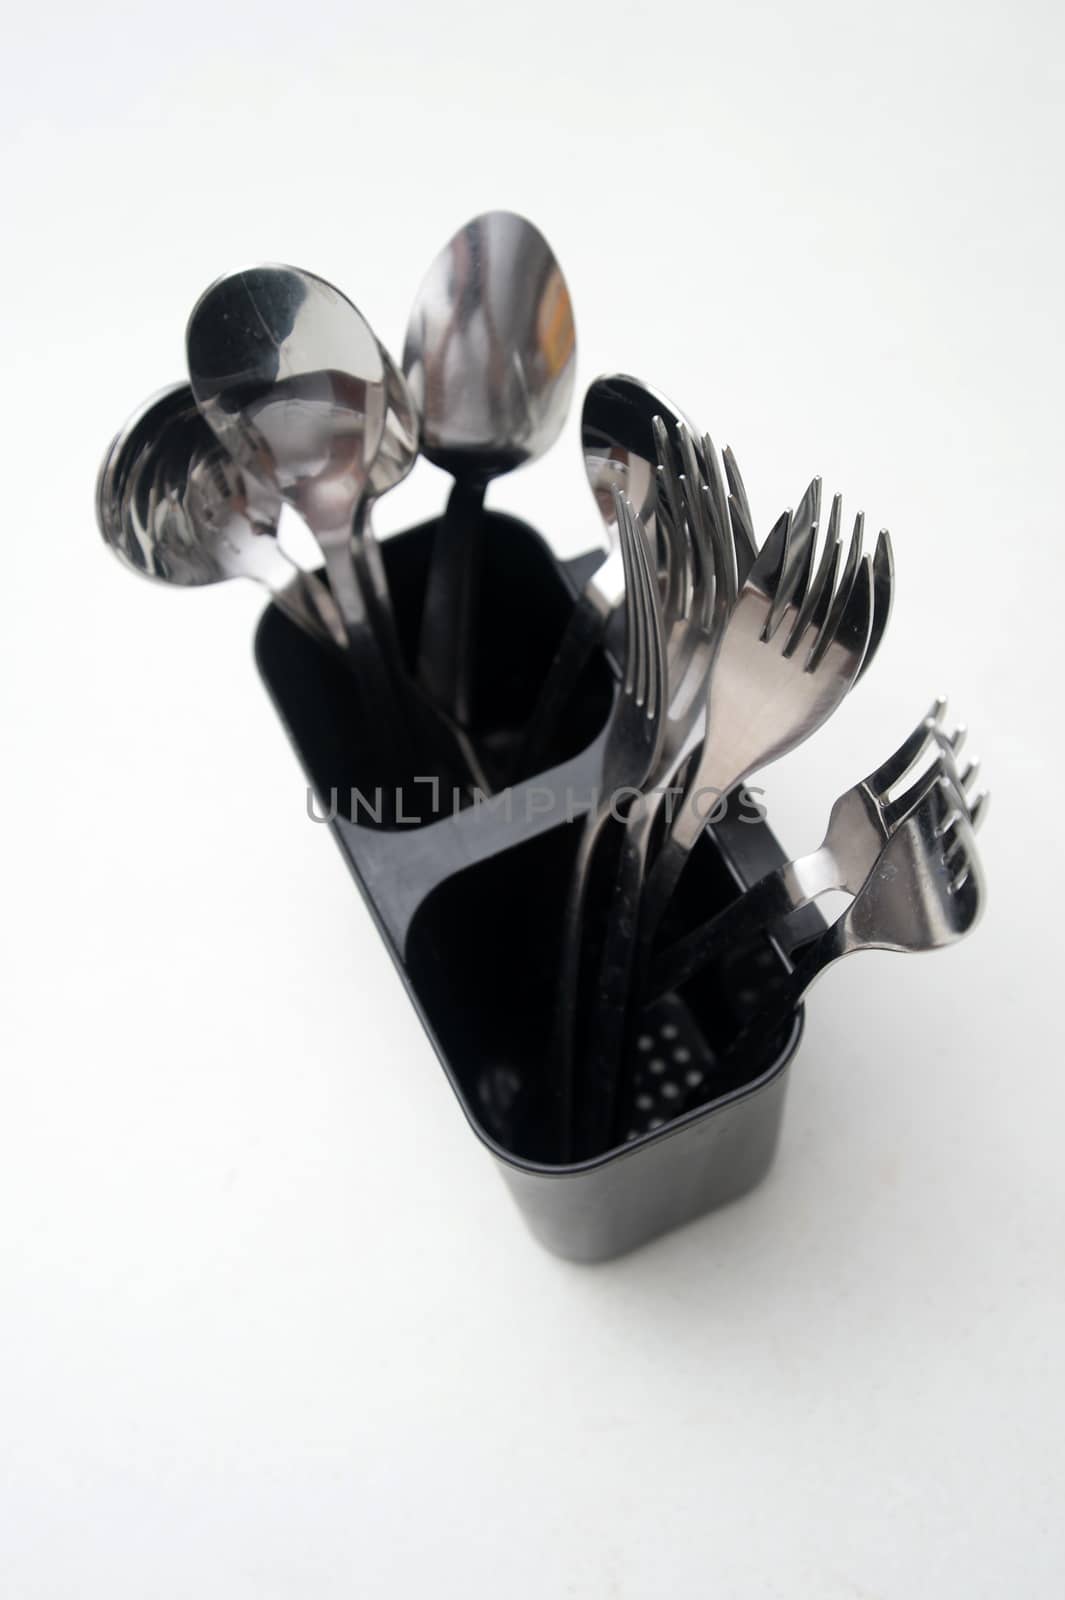 Silver cutlery isolated on a kitchen bench